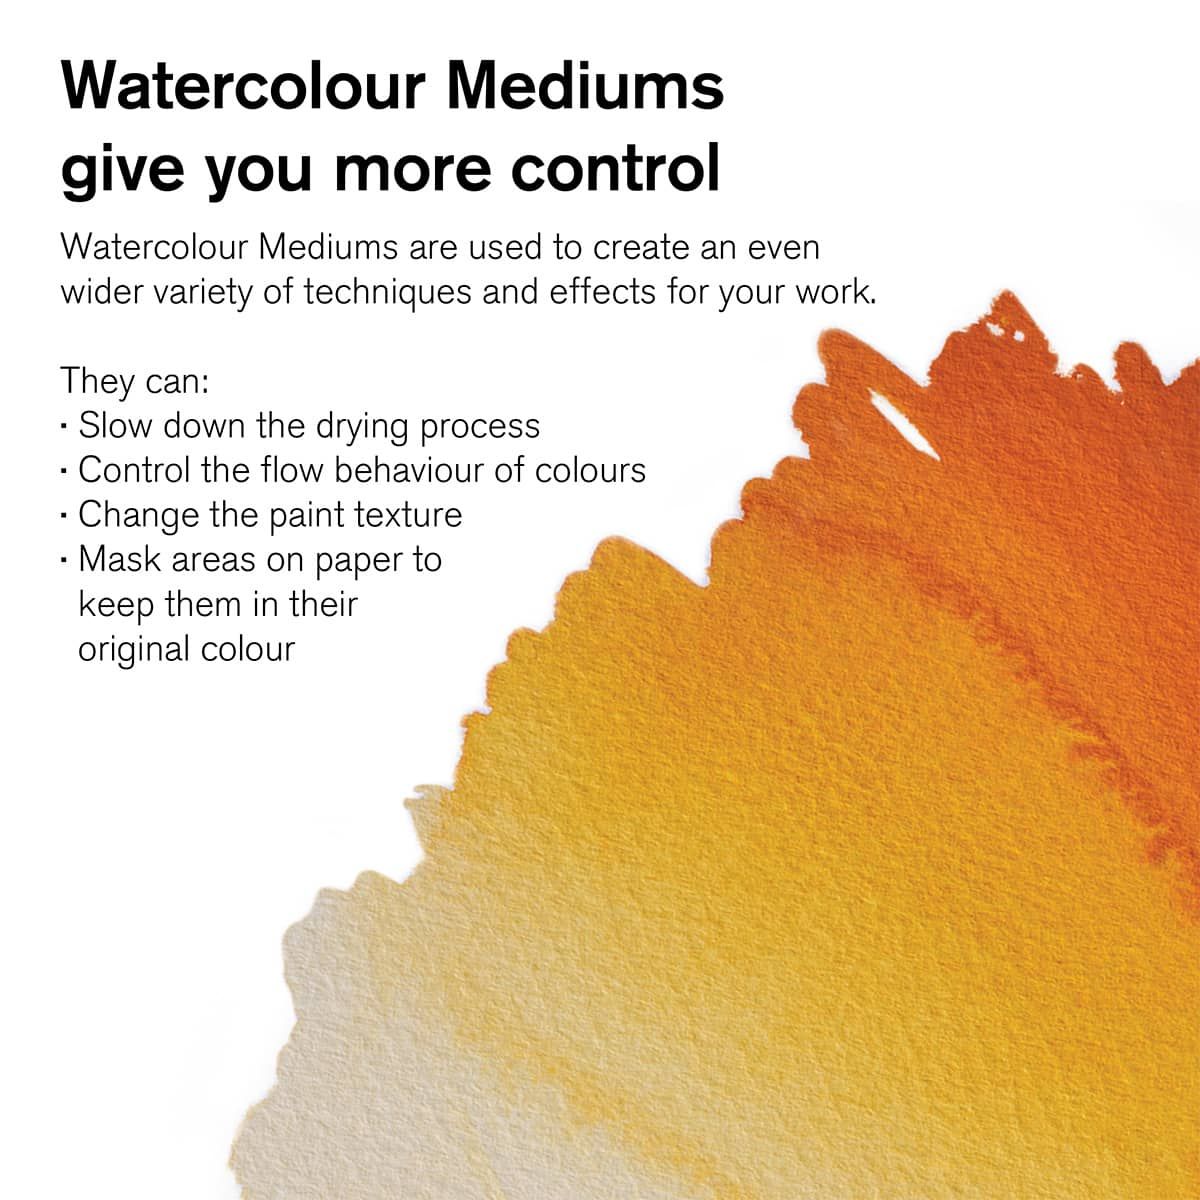 Watercolour Mediums give you more control